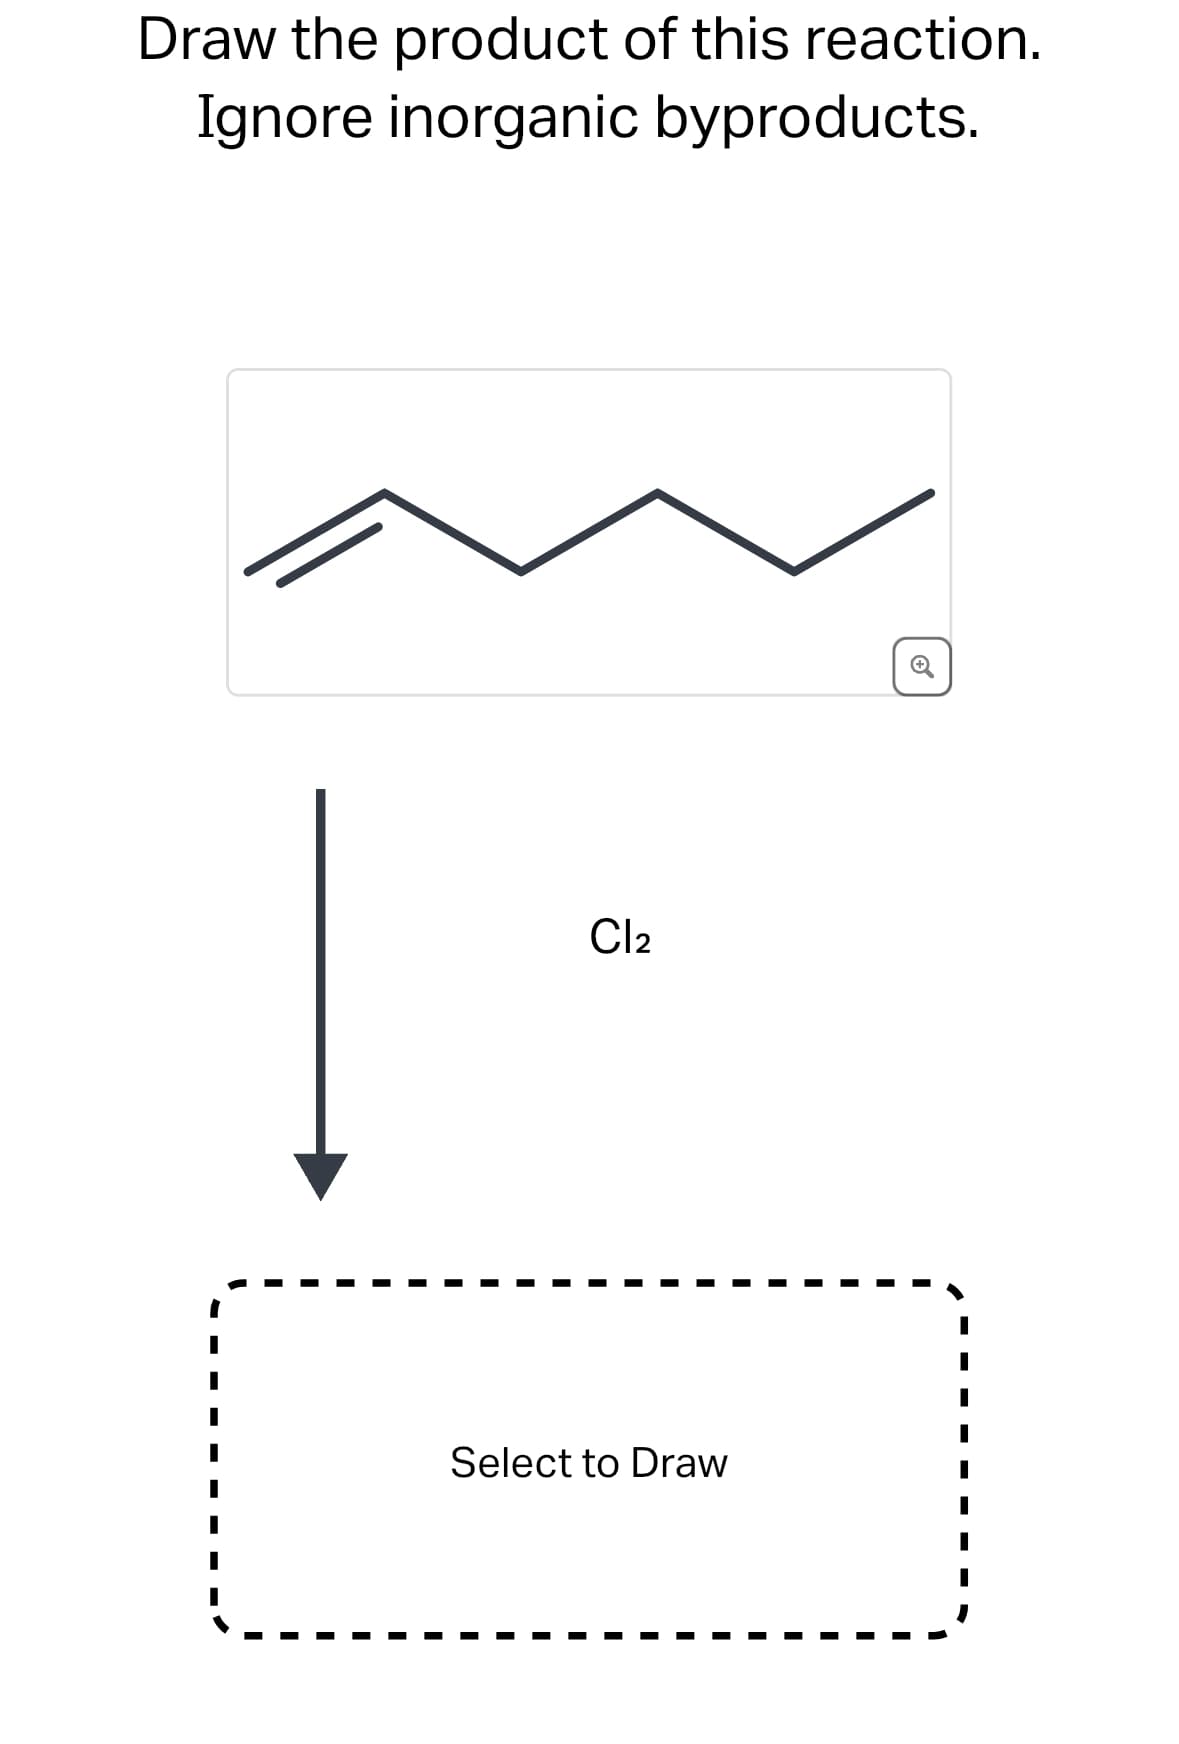 Draw the product of this reaction.
Ignore inorganic byproducts.
Cl2
Select to Draw